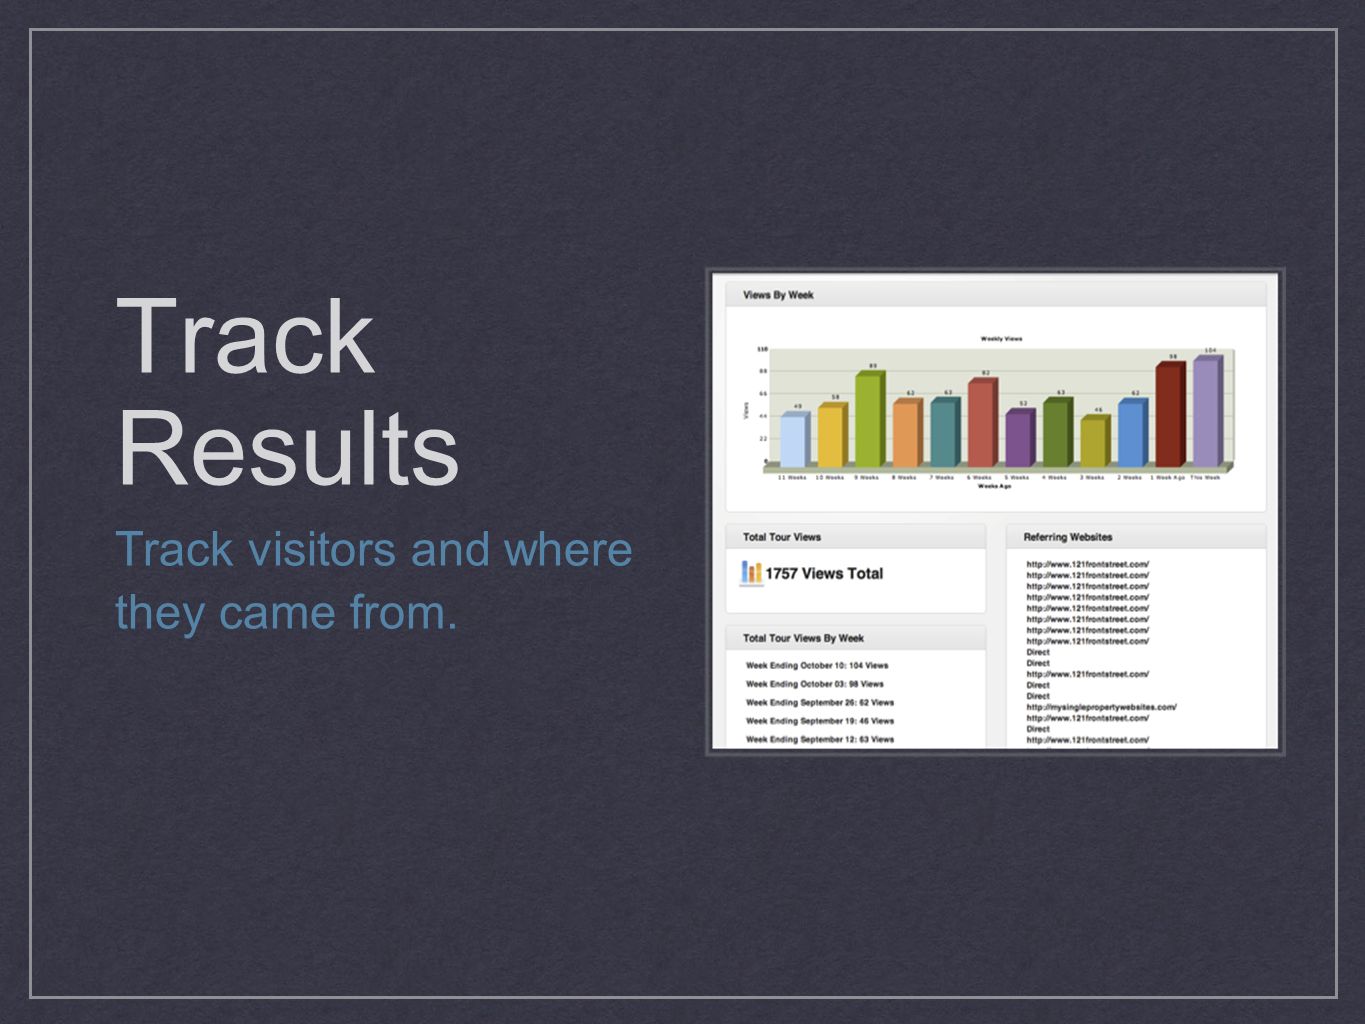 Track Results Track visitors and where they came from.